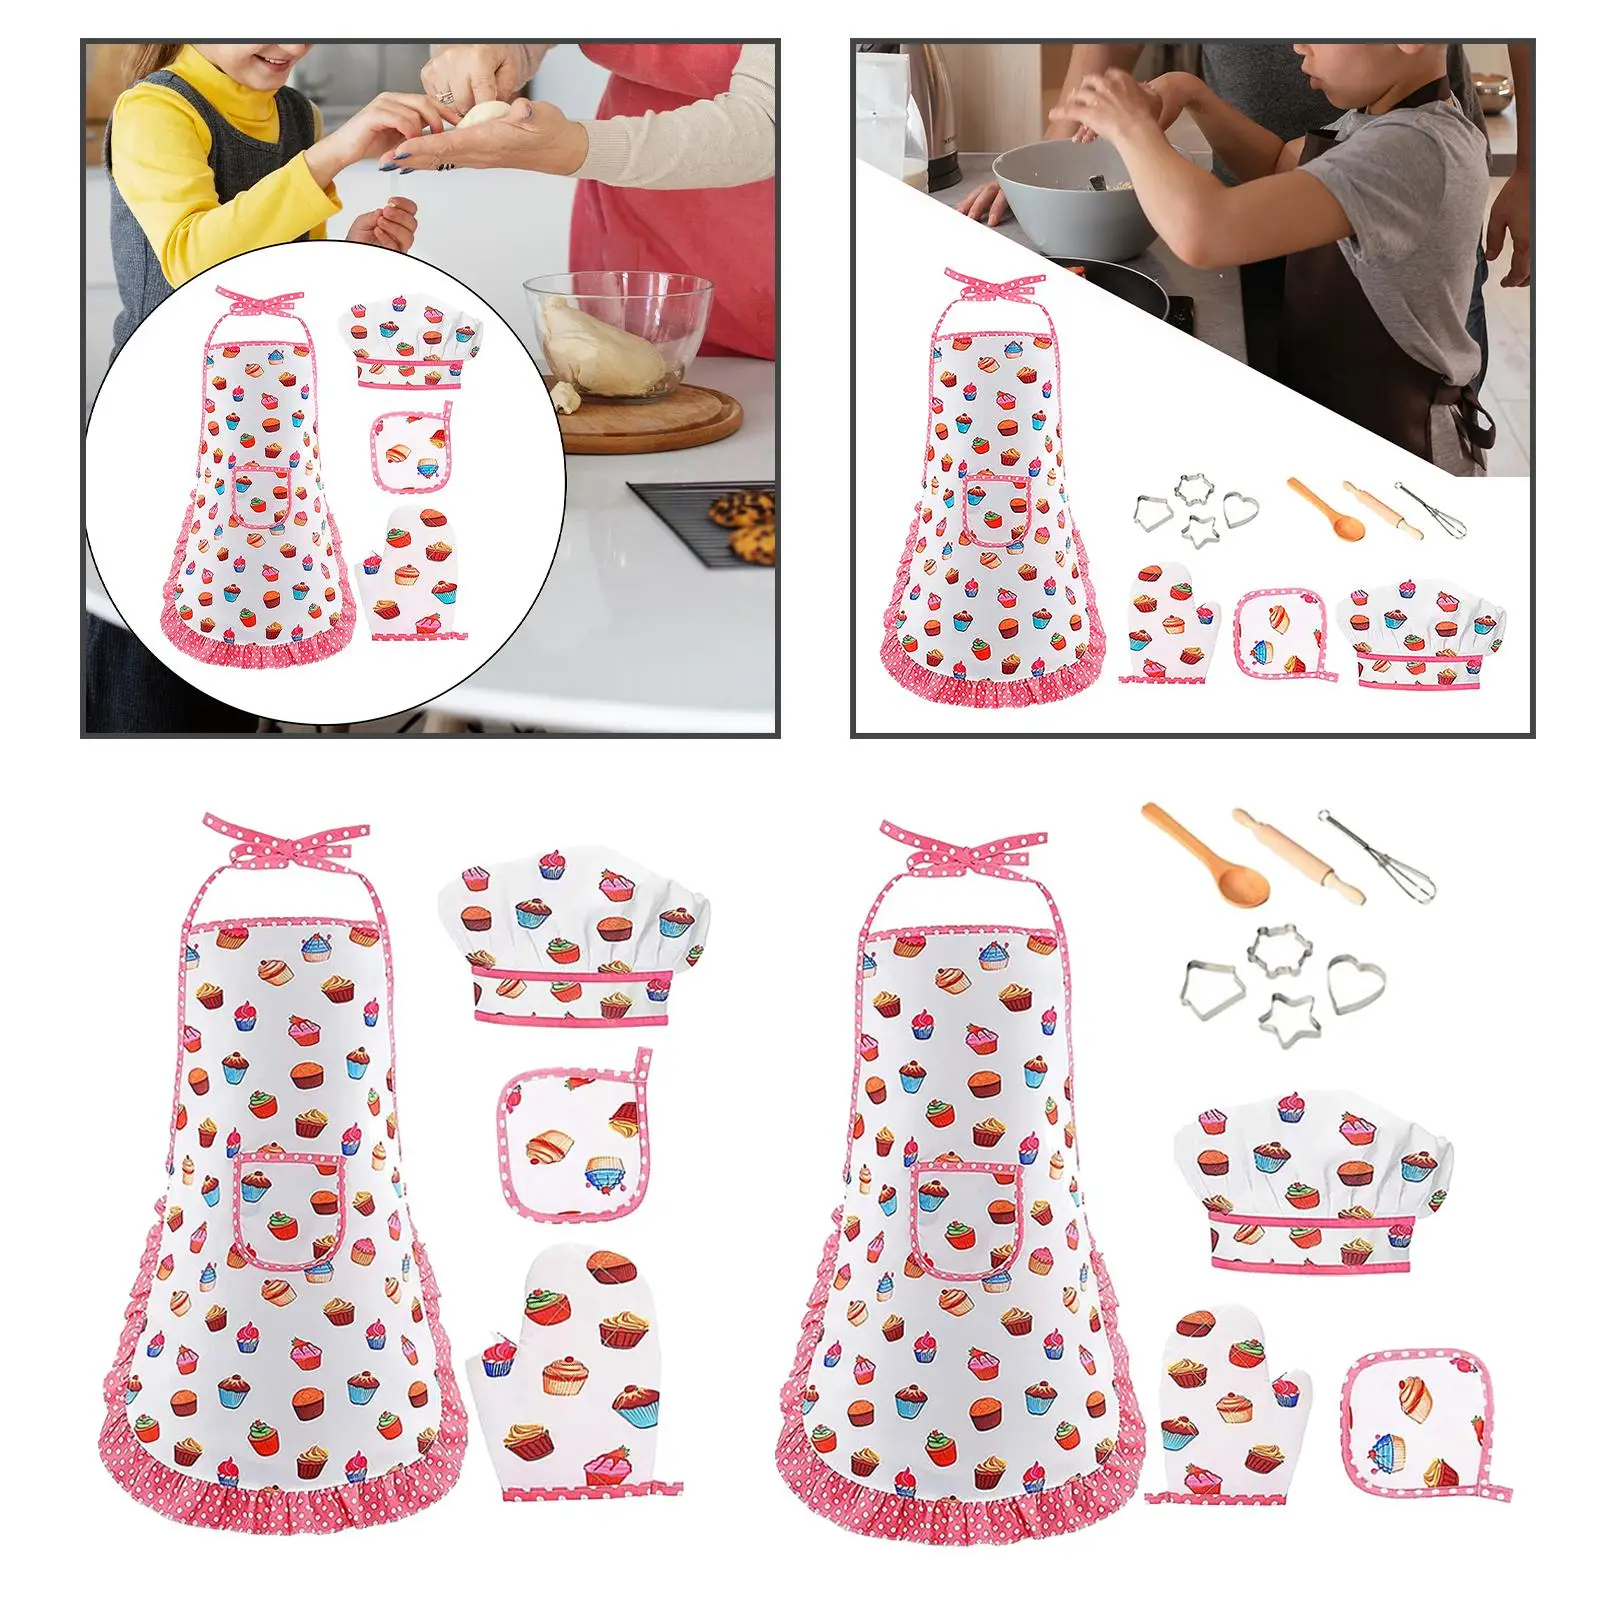 Simulation Kids Cooking Baking Set Utensils Chef Hat Kids Apron Role Play Clothing Set for Toddlers Birthday Gift